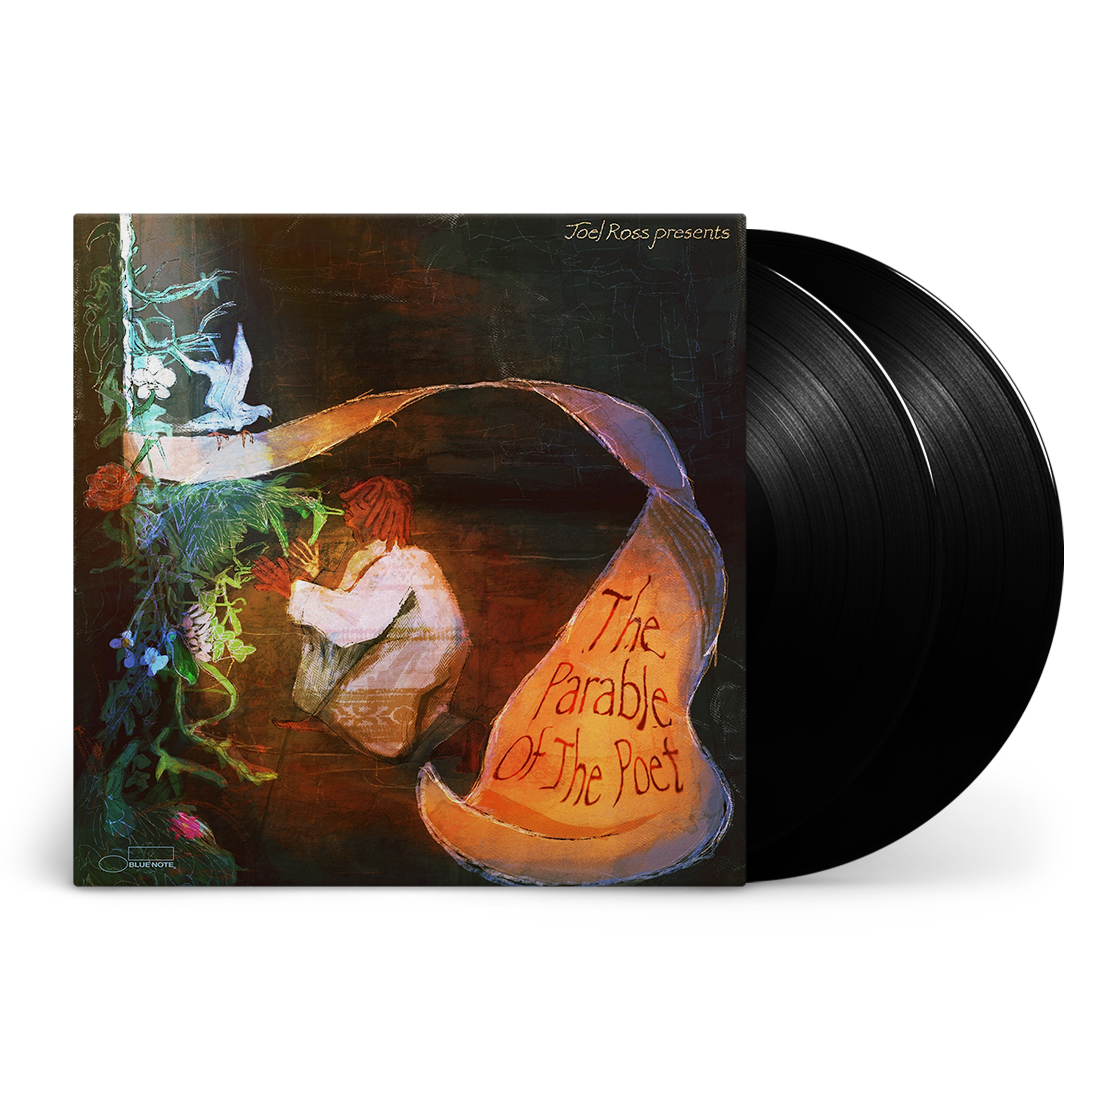 The Parable Of The Poet 2LP